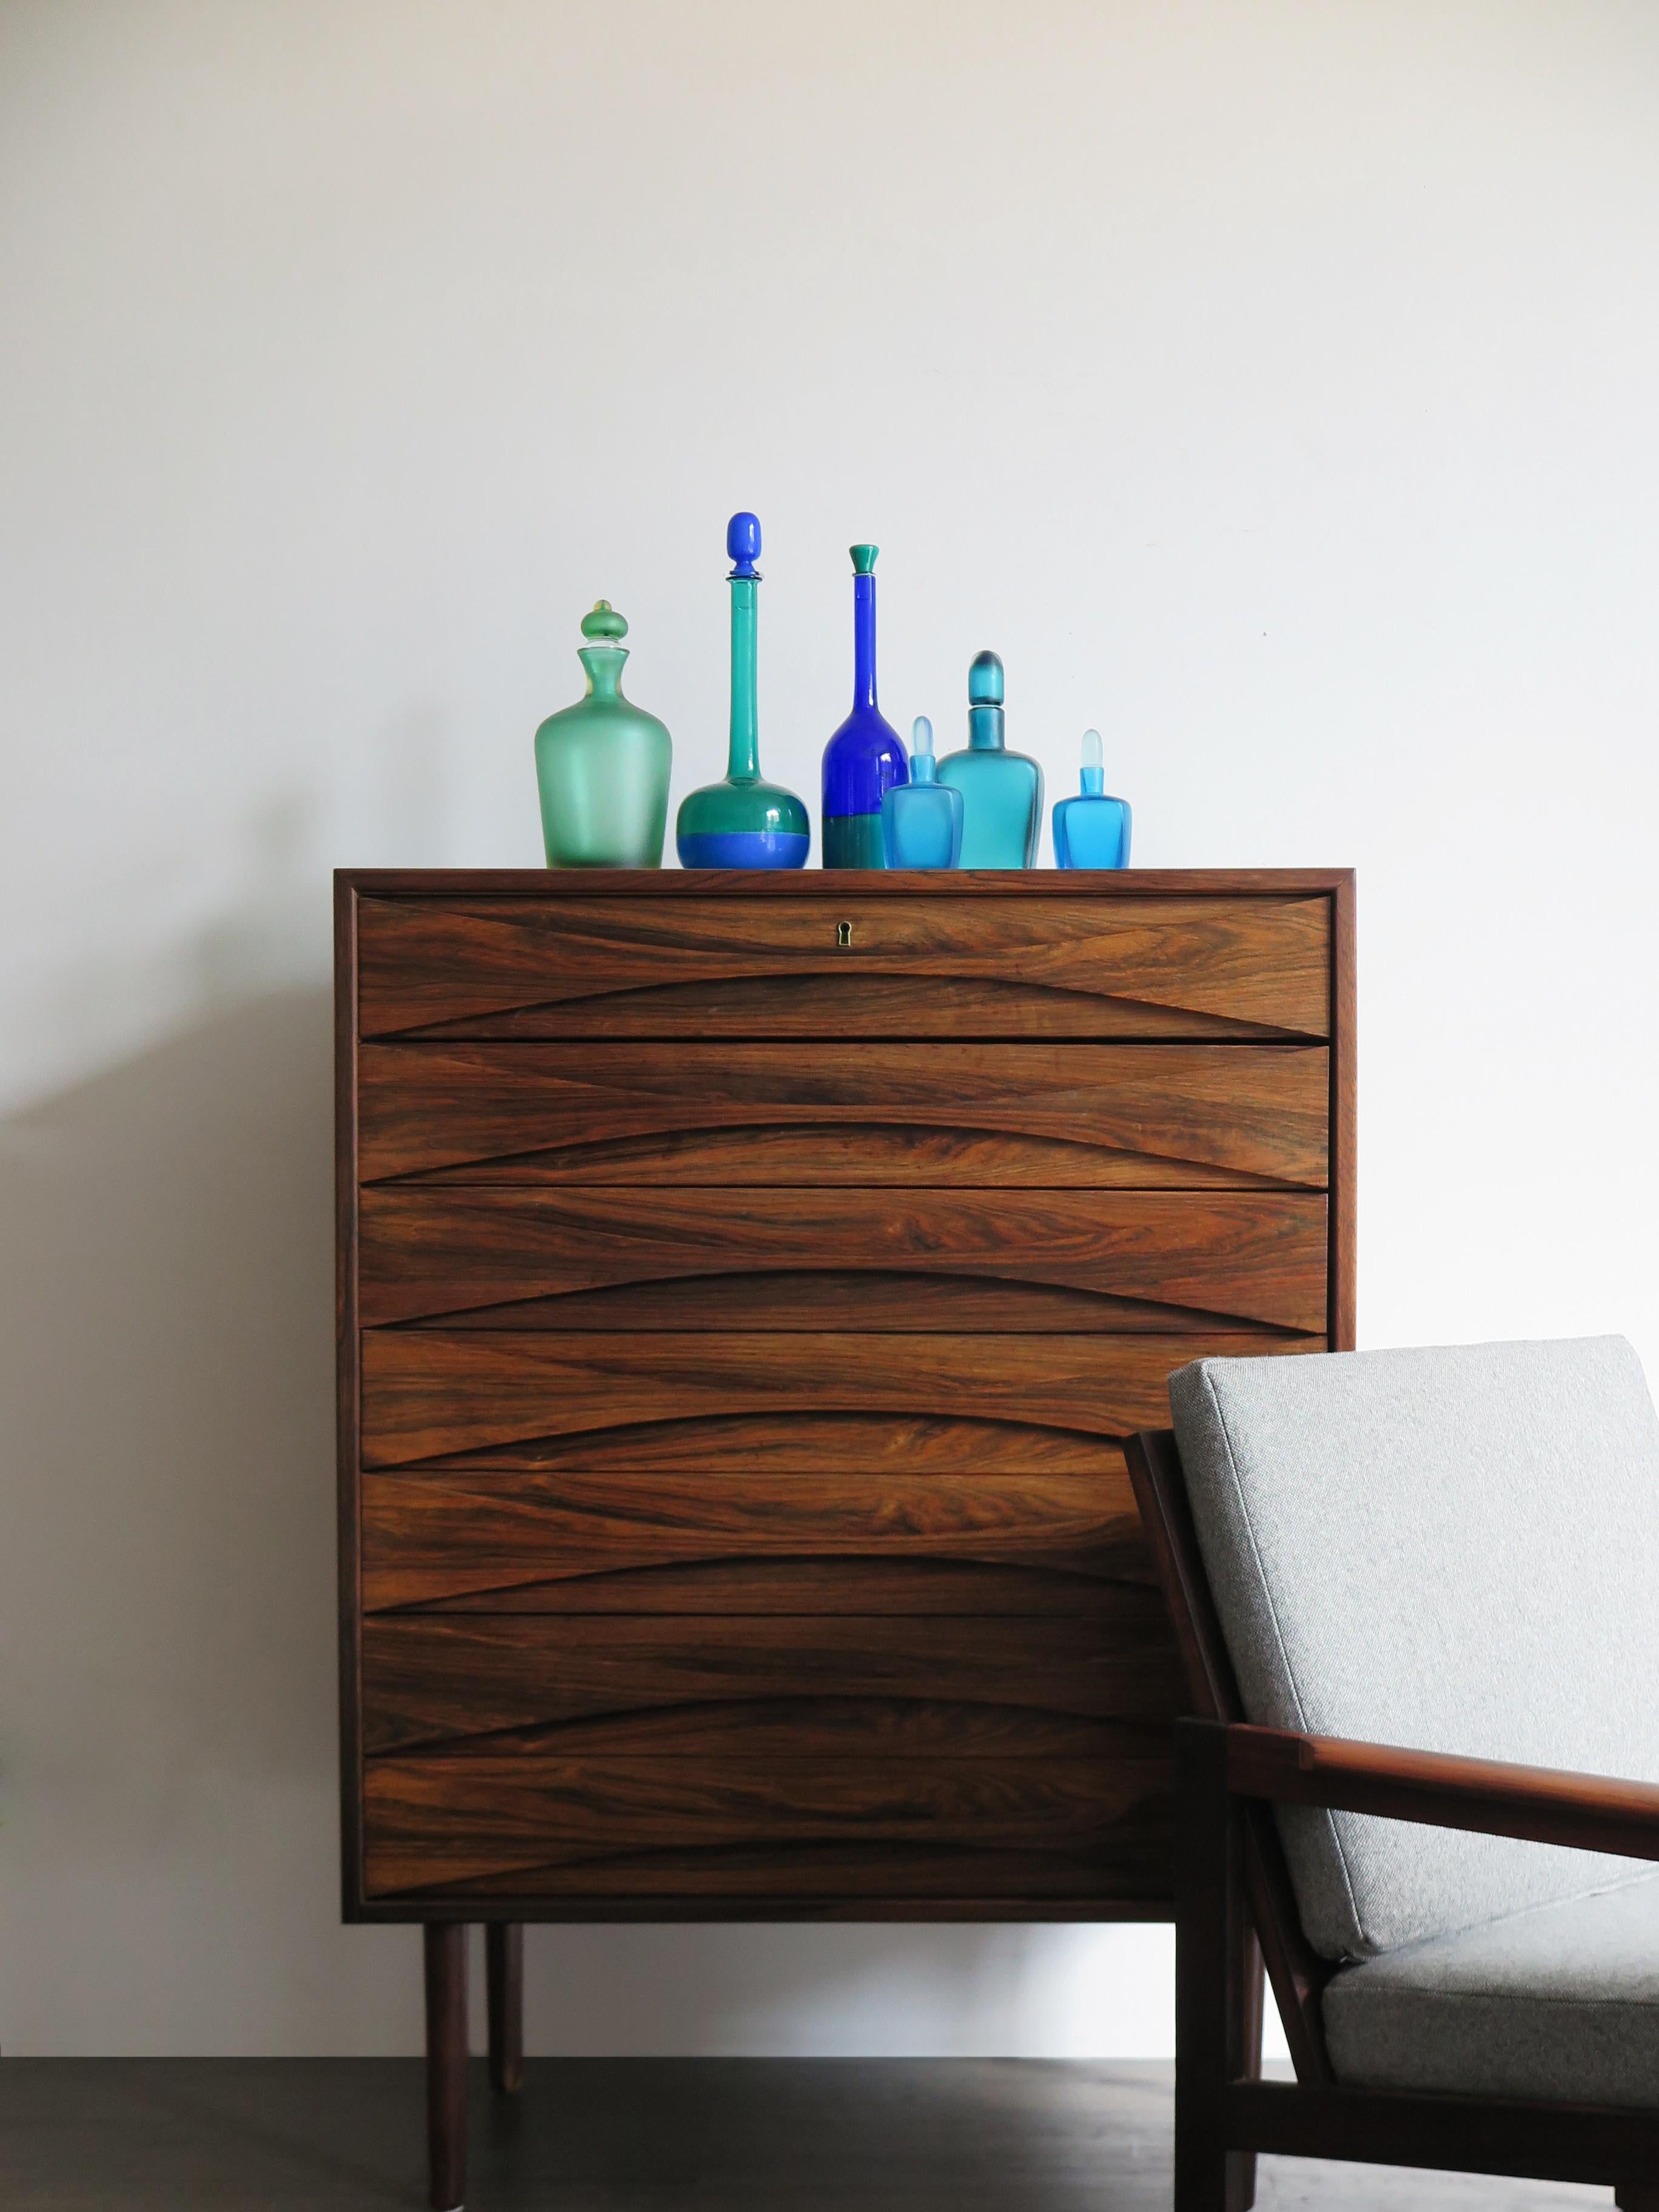 Famous and amazing Danish Mid-Century Modern design dark wood chest of drawers designed by Arne Vodder for N.C Møbler, 1950s

Please note that the item is original of the period and this shows normal signs of age and use.